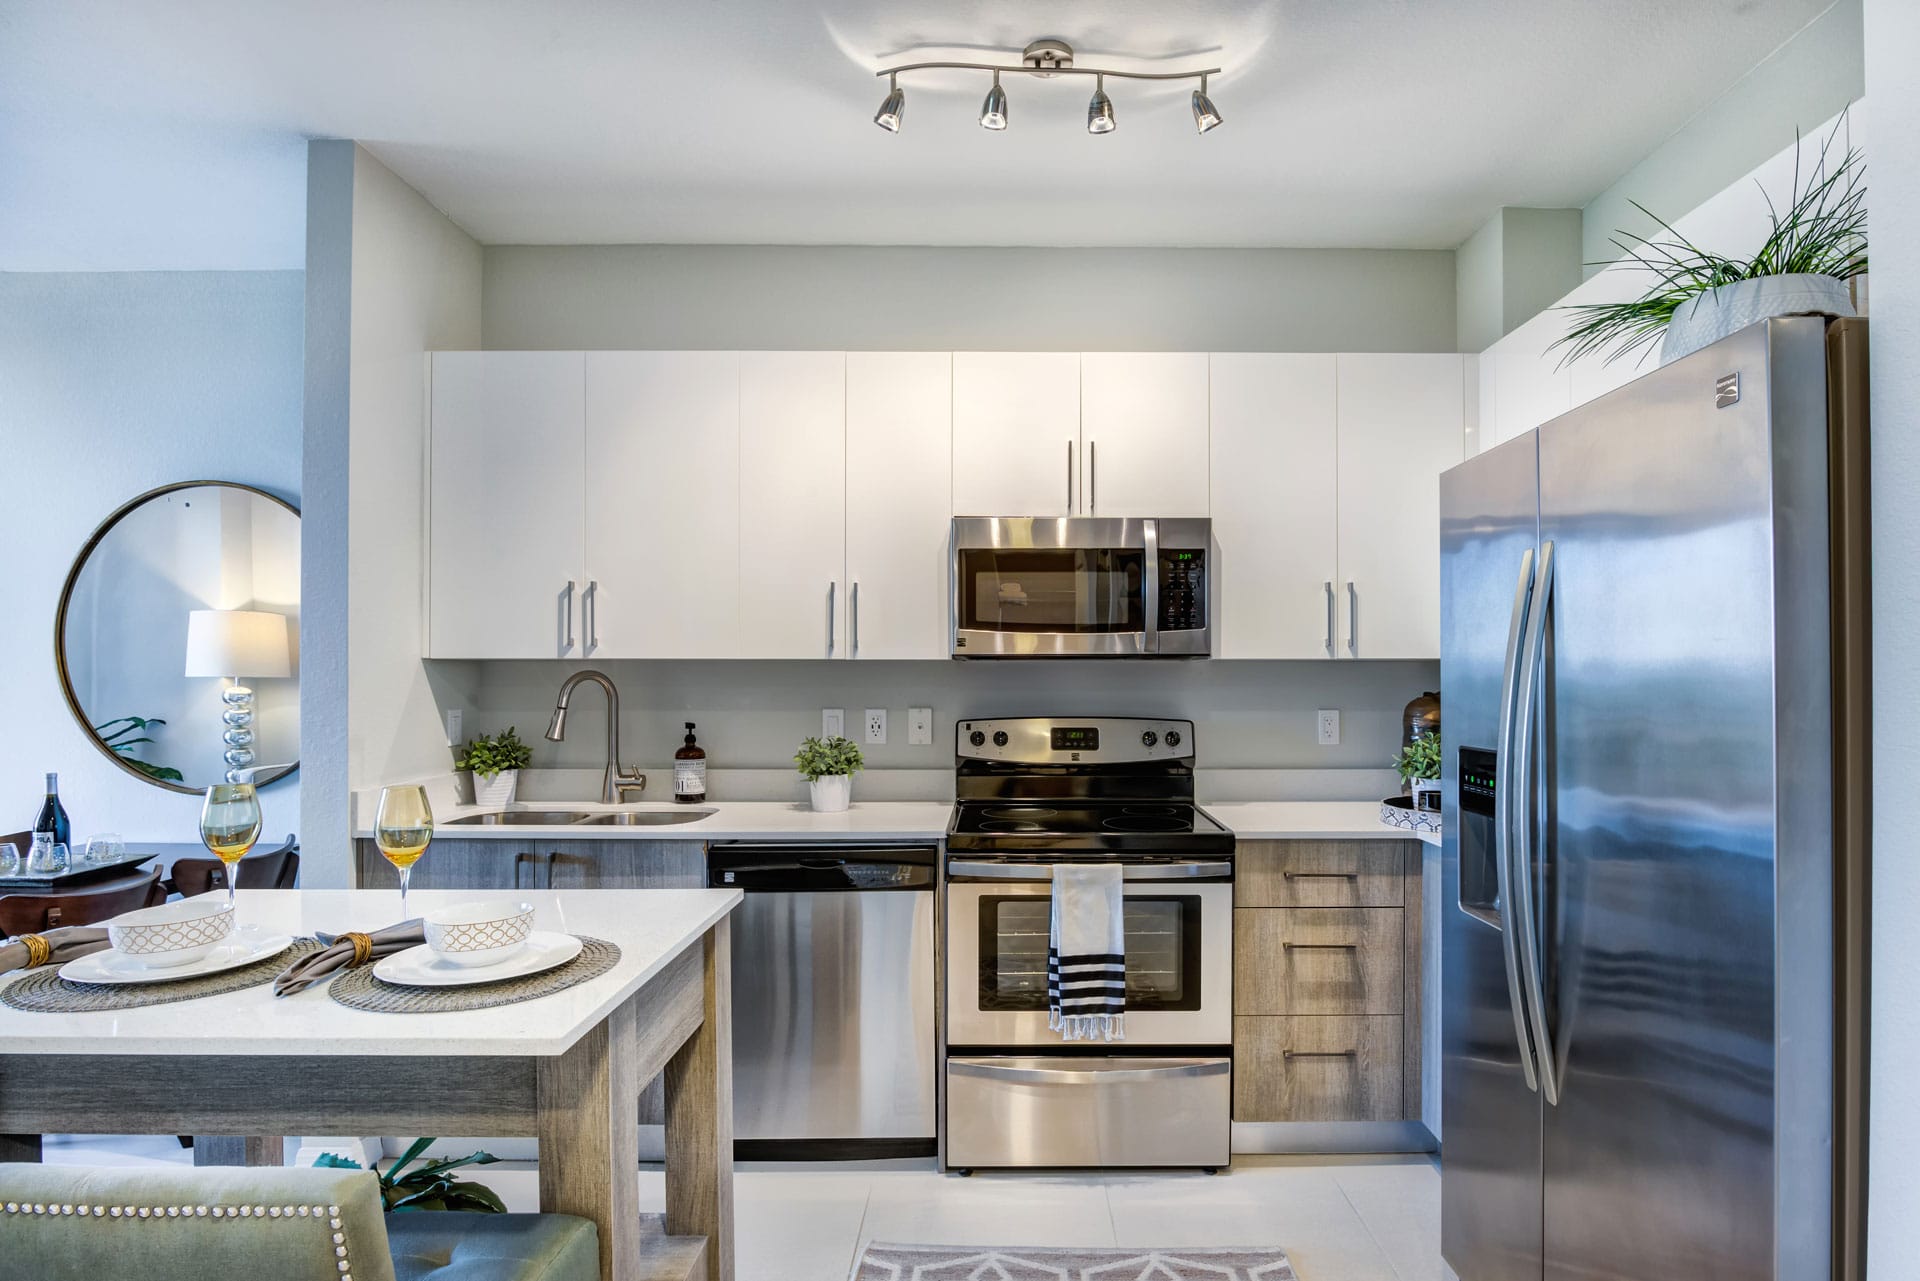 Modern kitchen with island stainless appliances, white cabinets.